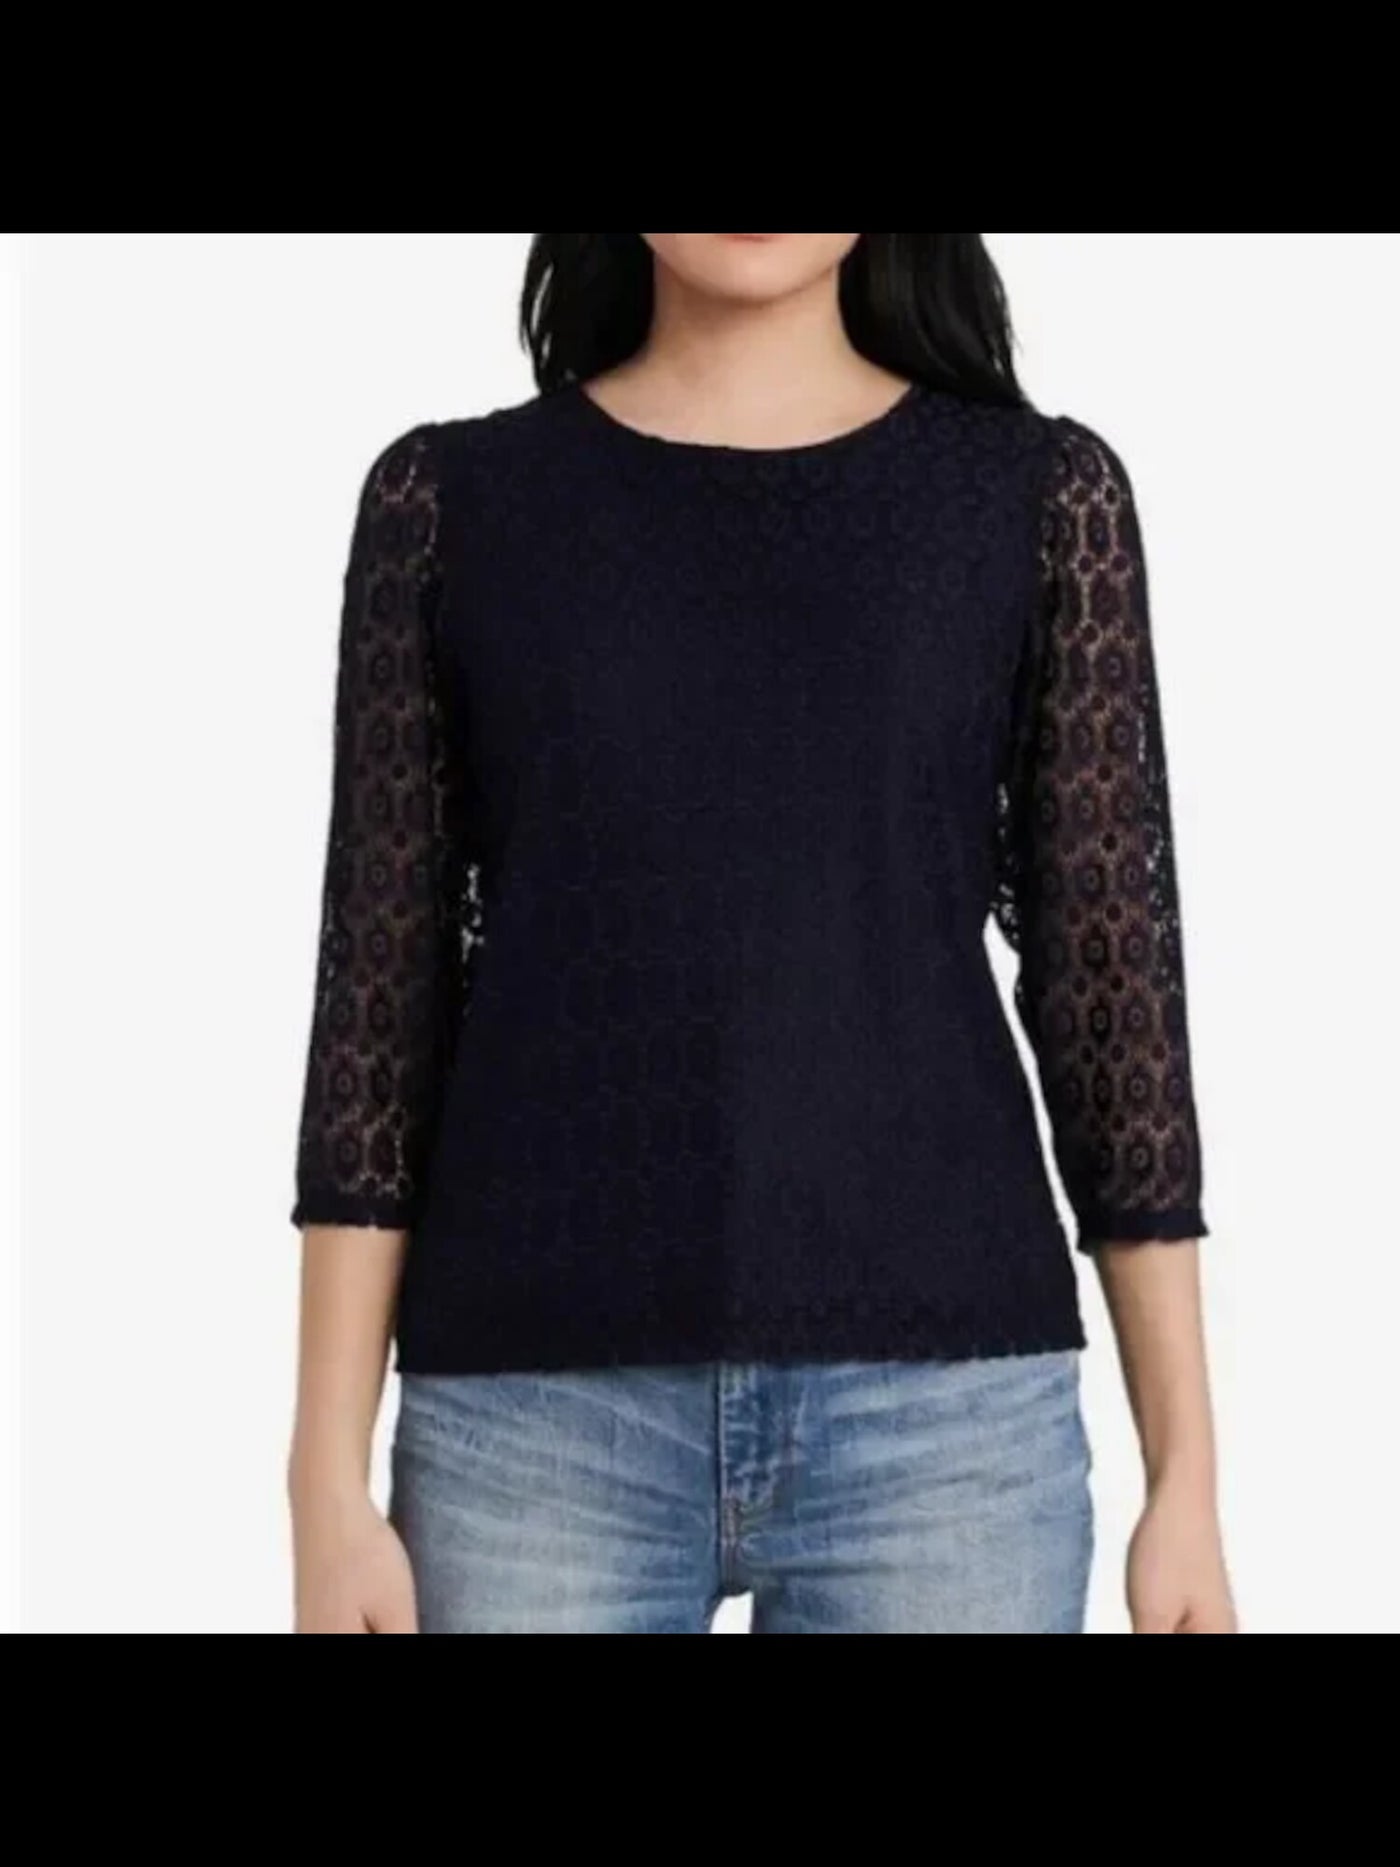 RILEY&RAE Womens Navy Textured Eyelet Keyhole-back 3/4 Sleeve Crew Neck Wear To Work Top M